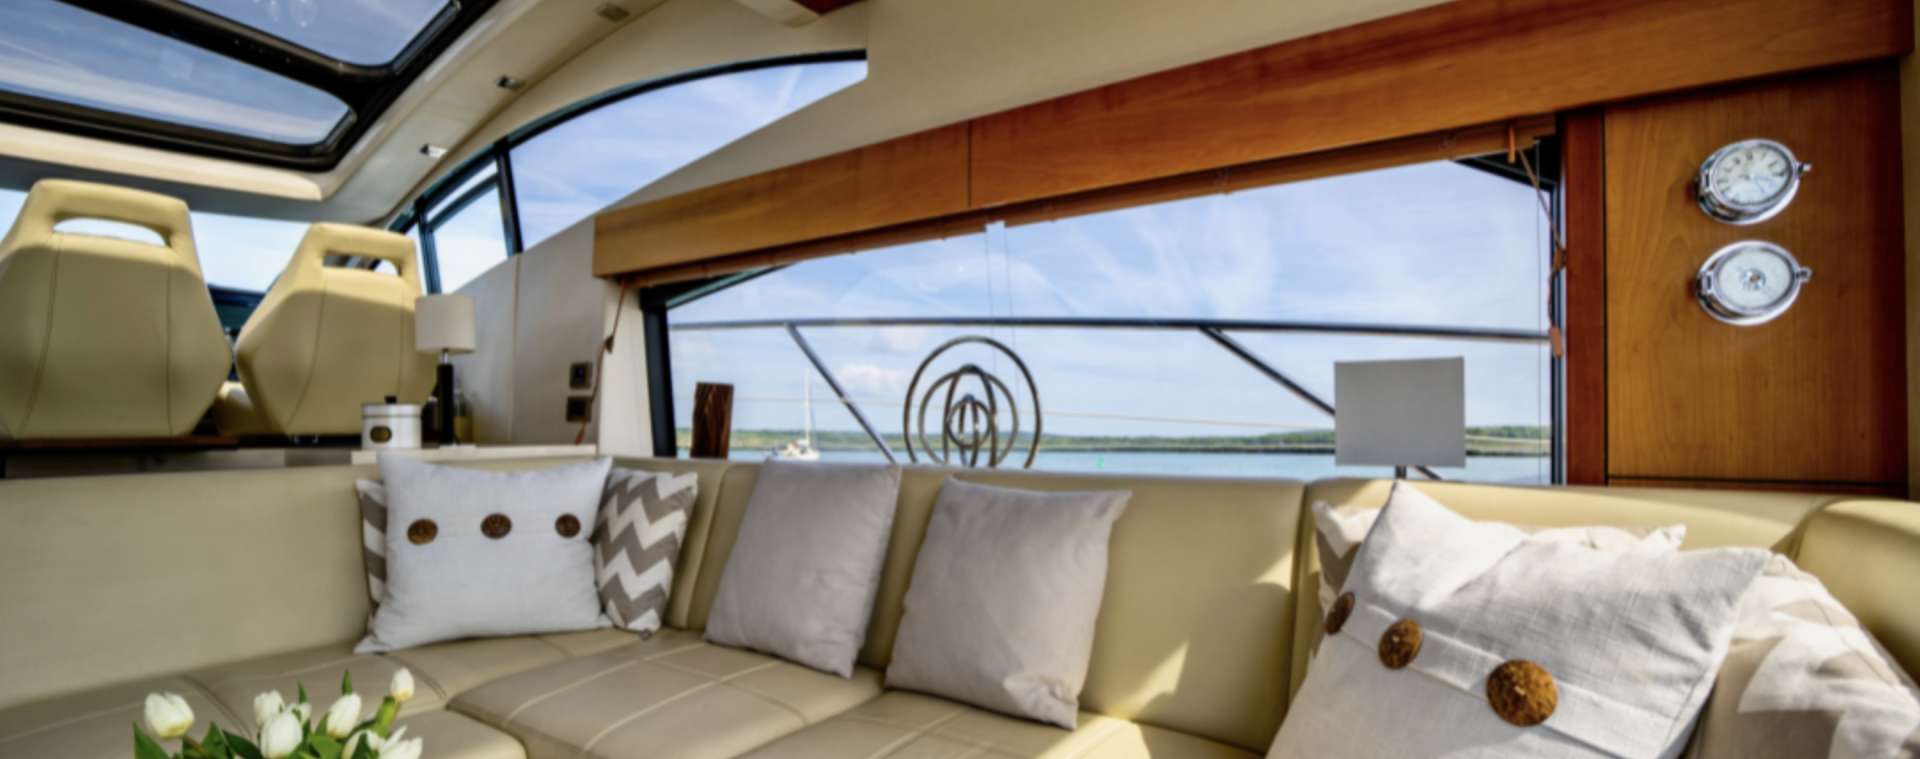 Predator 60 - Yacht Charter The Solent & Boat hire in United Kingdom England The Solent Southampton Southampton 5